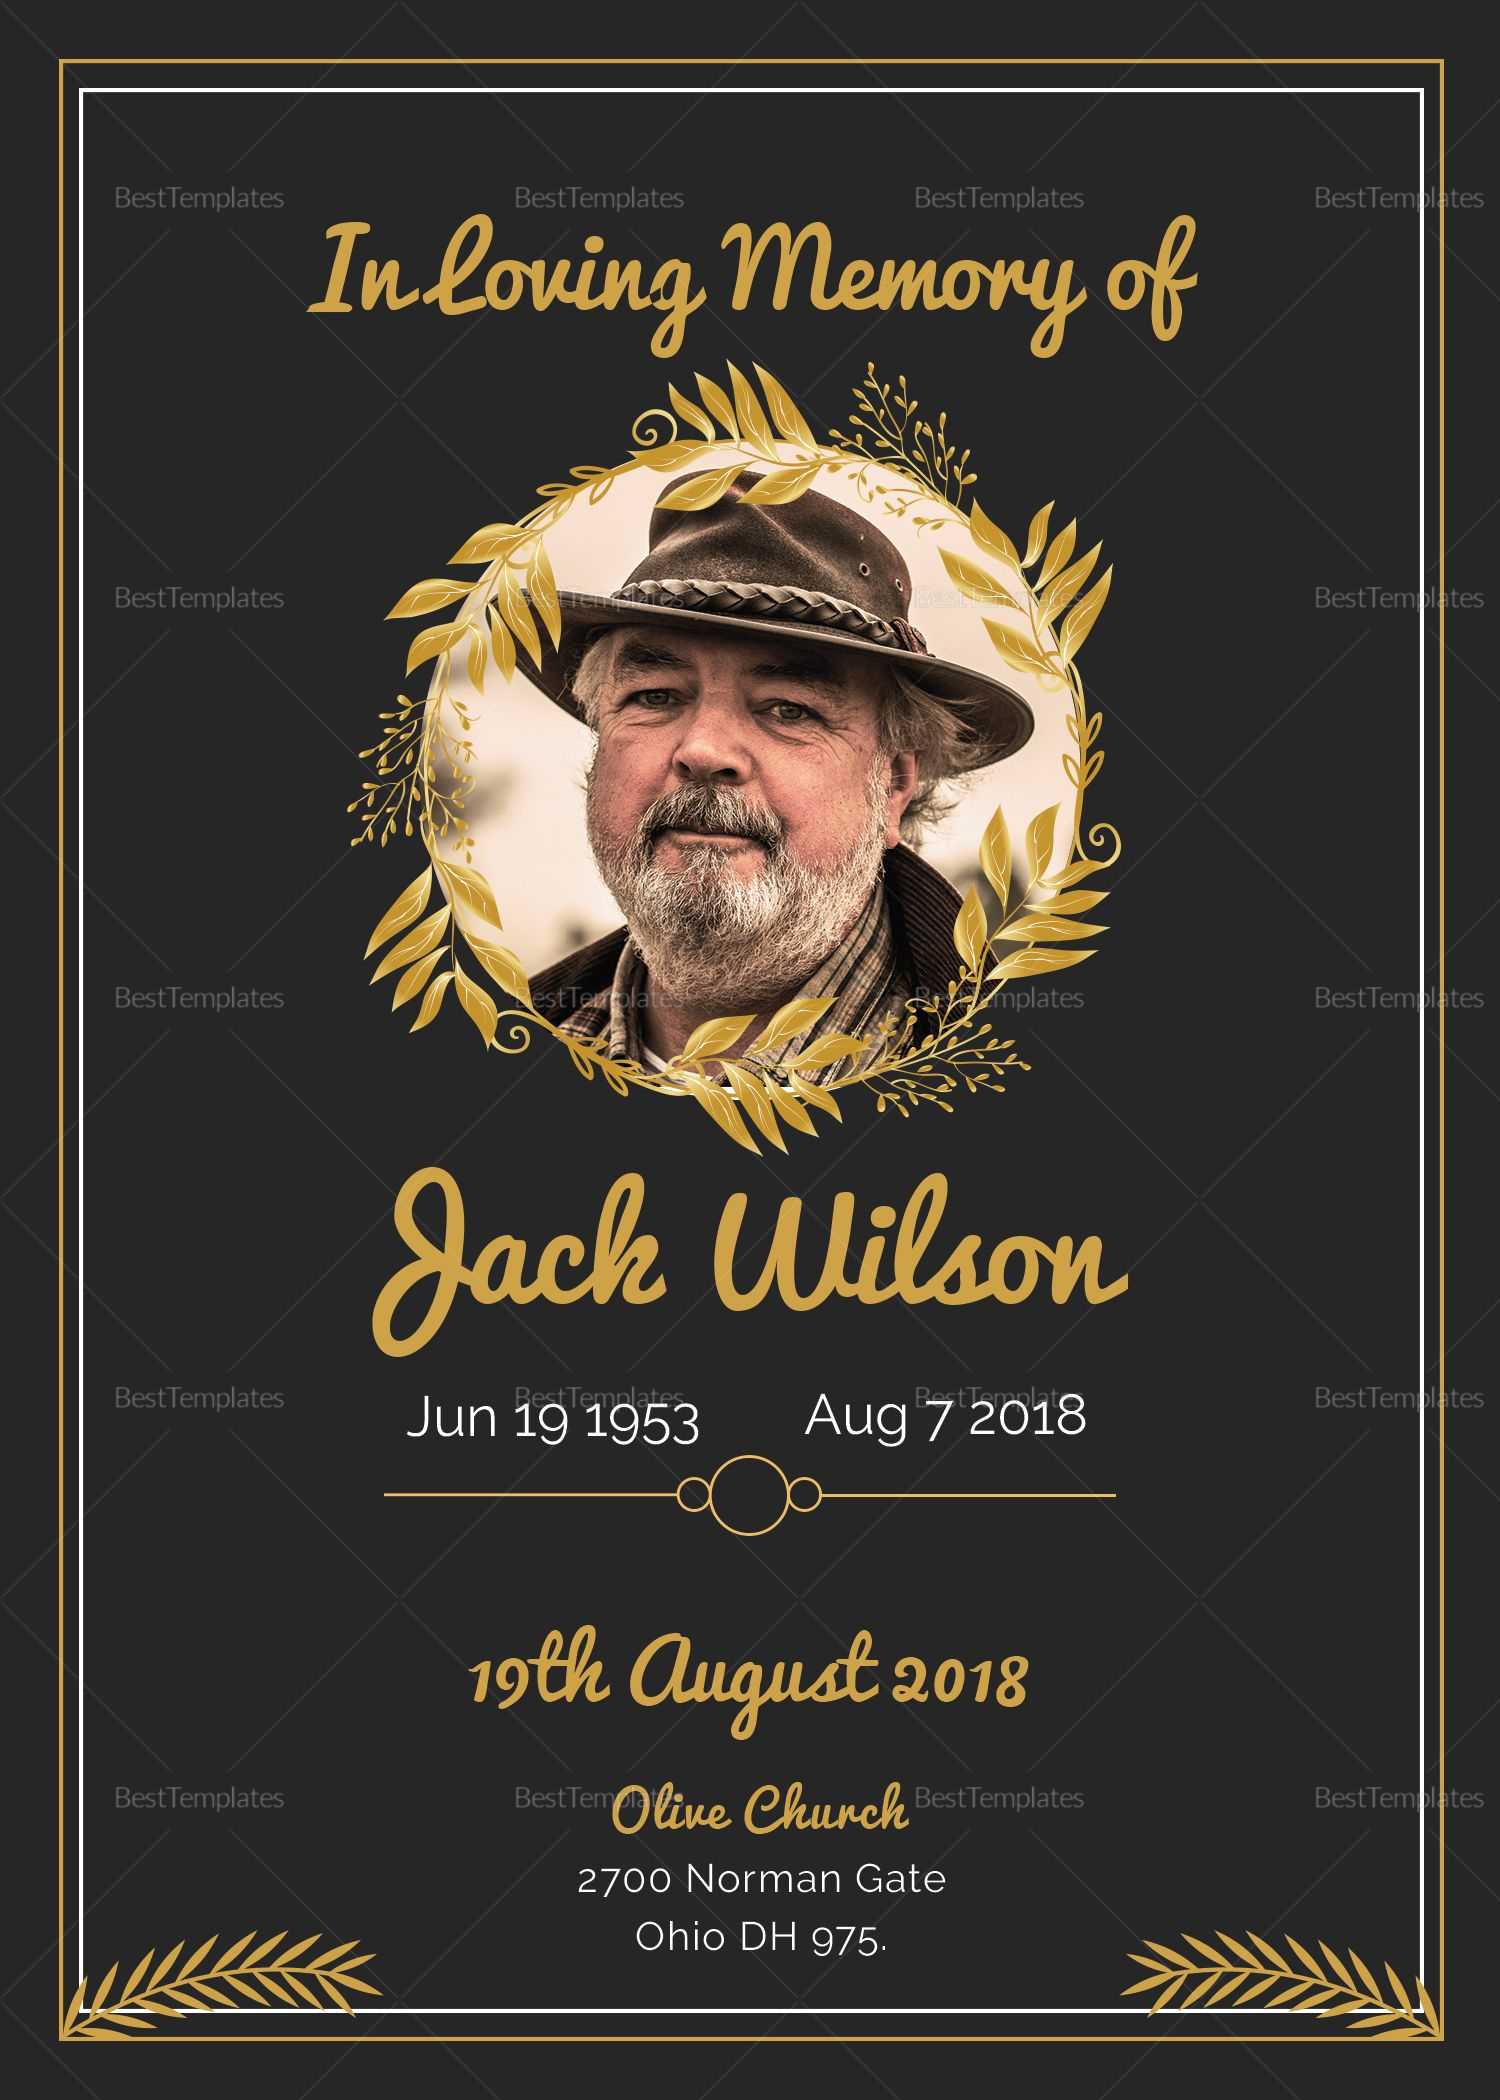 Funeral Invitation Card Template | Funeral Invitation Inside Funeral Invitation Card Template